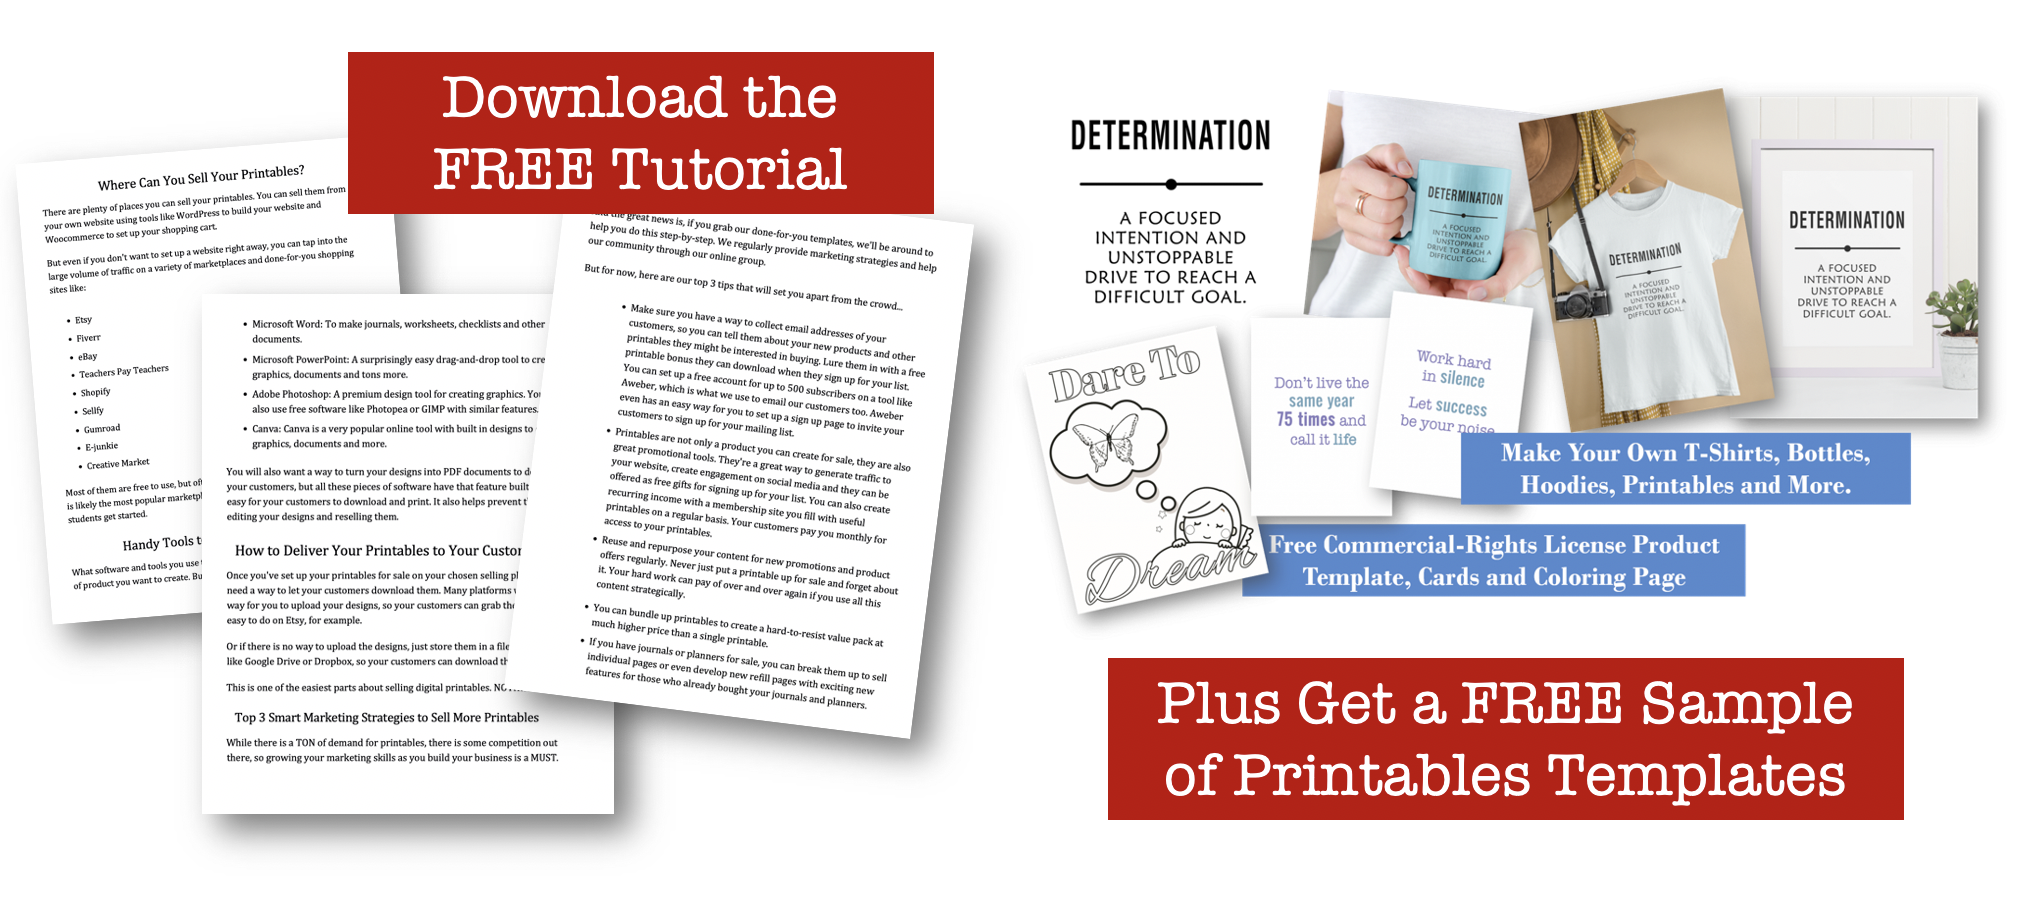 Download the Free Tutorial and Get FREE Printables Templates